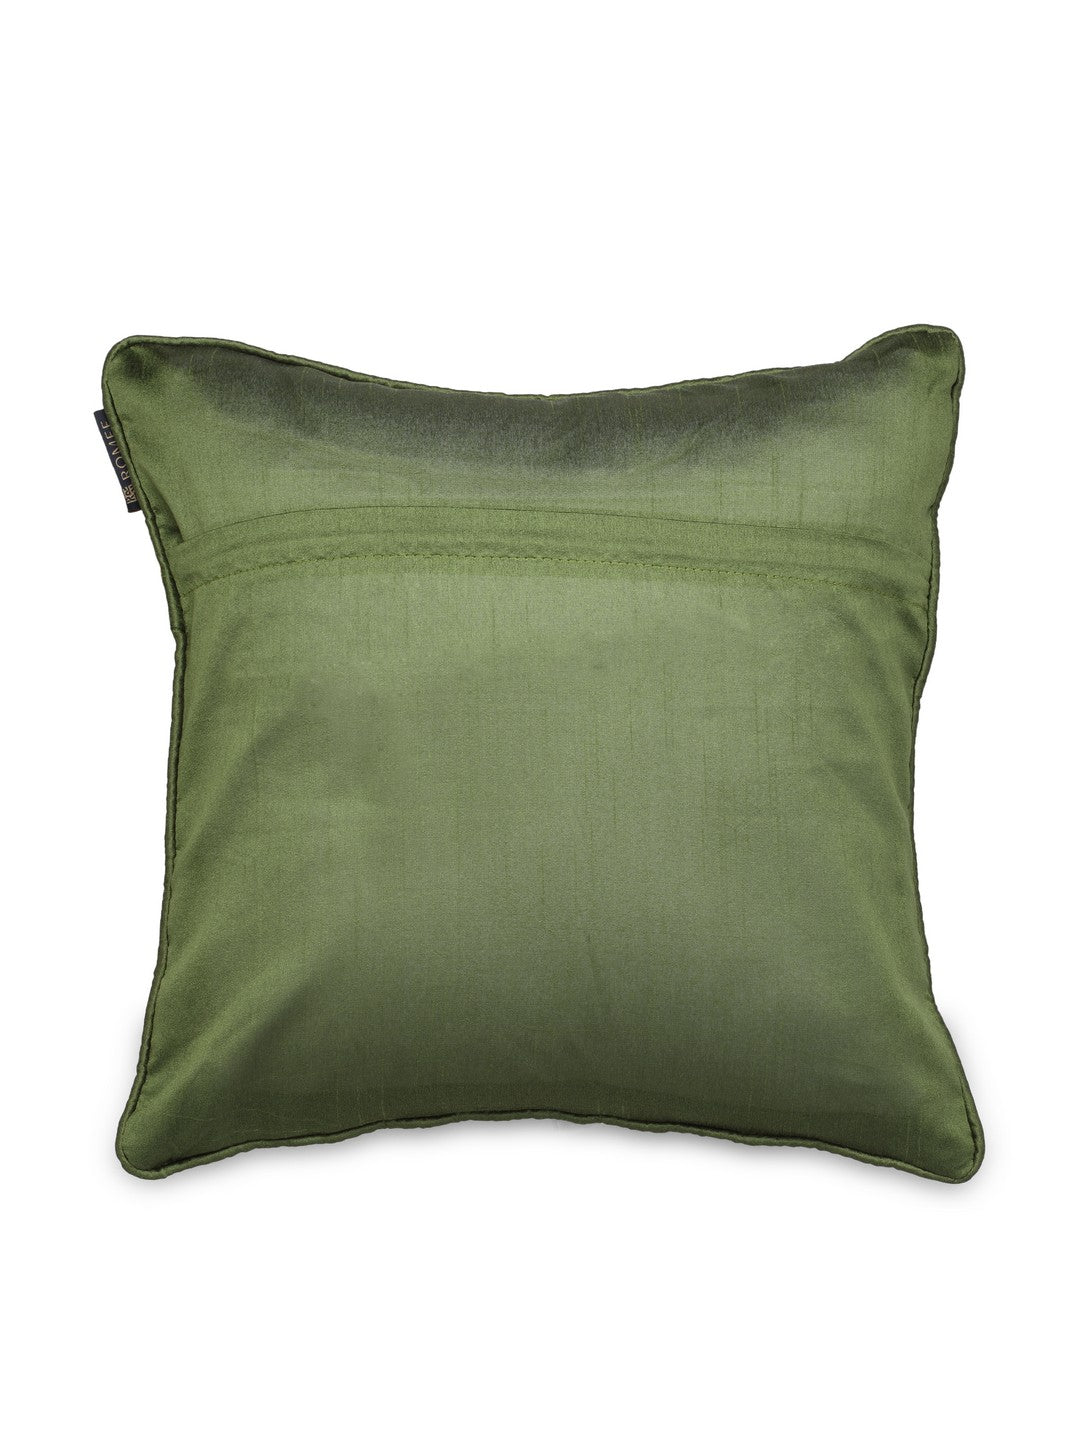 Chenille Fabric Solid Cushion Covers (Parrot Green, 16x16-inch) - Set of 5